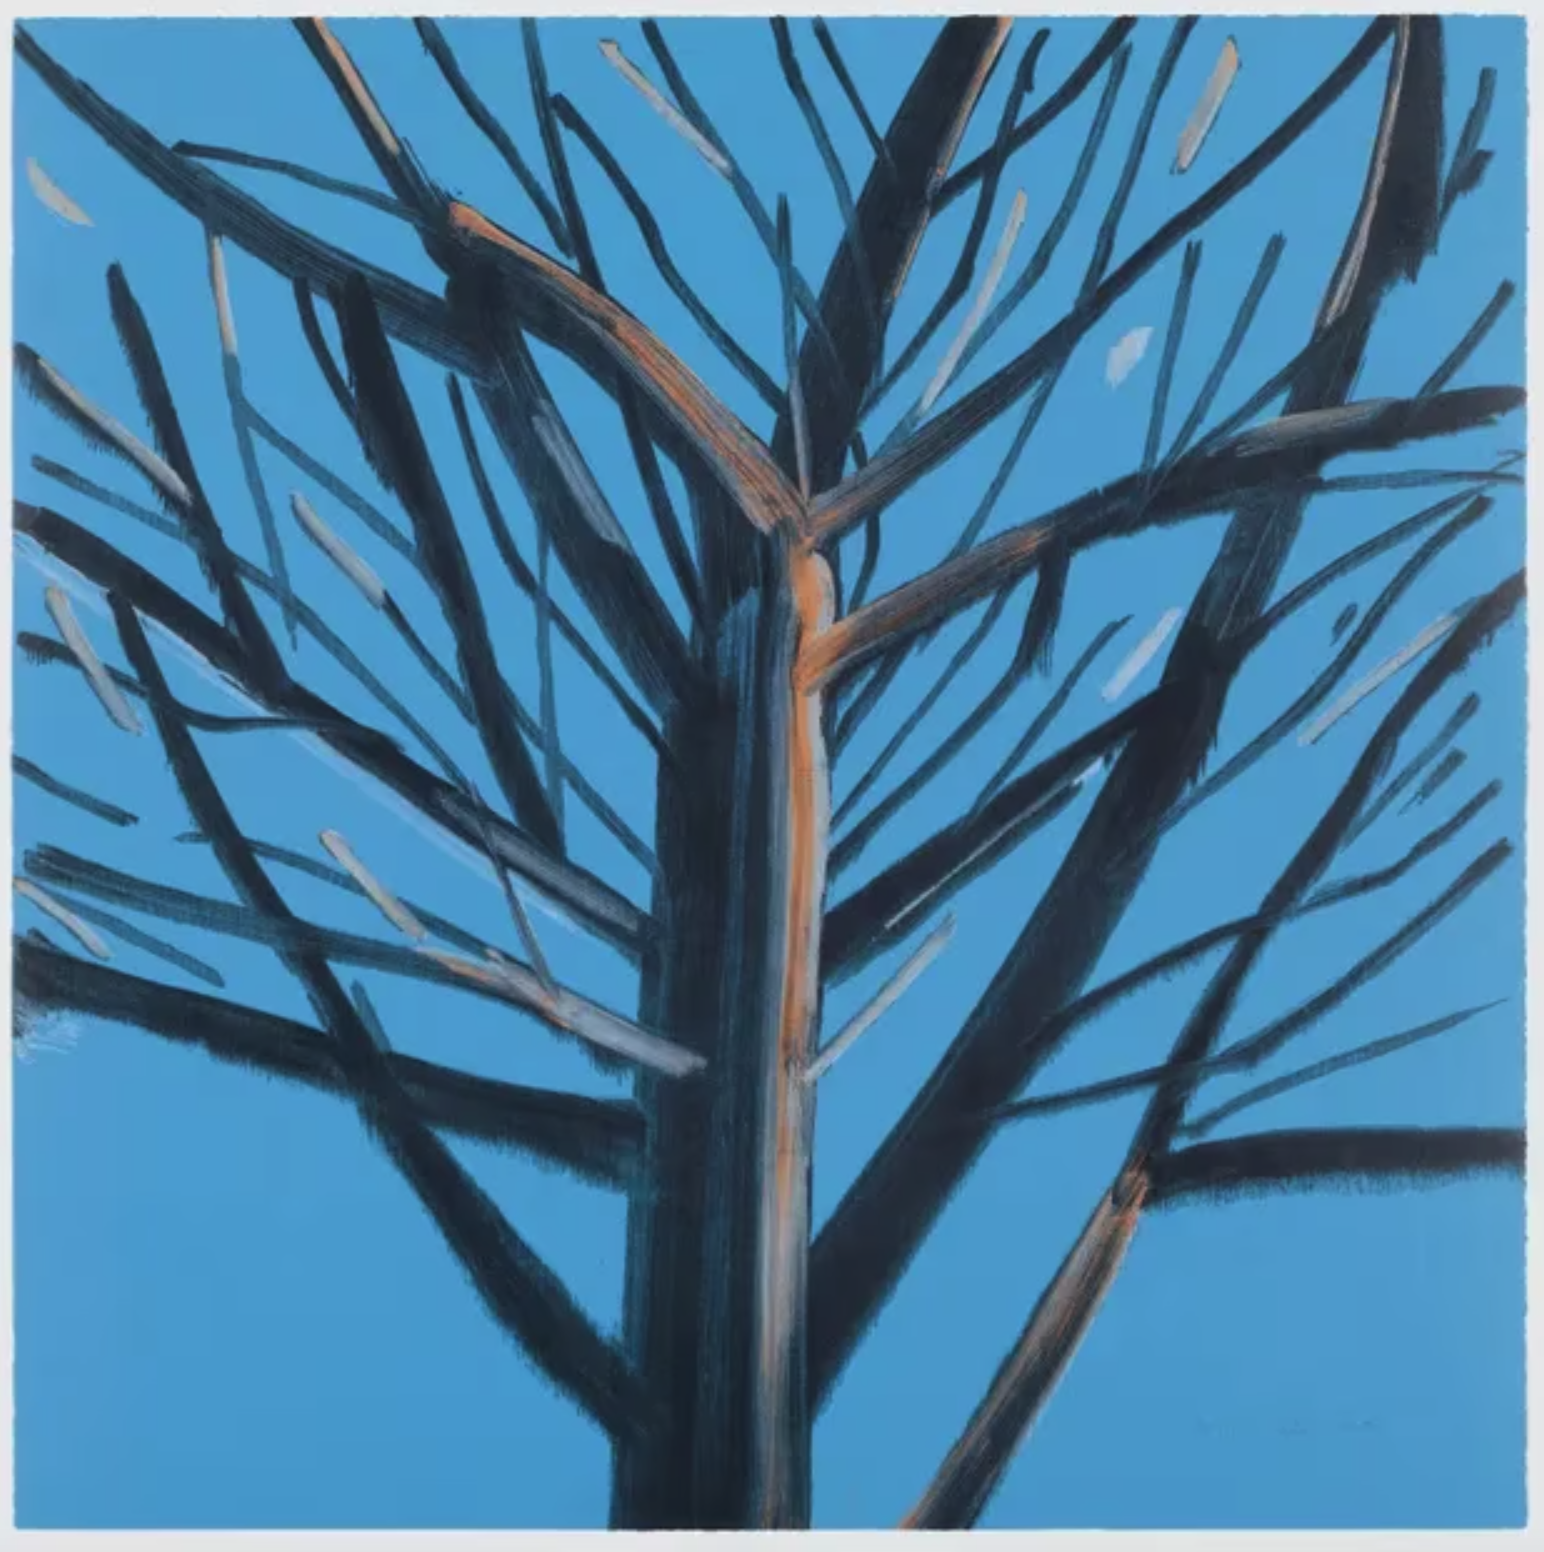 Artist Alex Katz did this woodcut and lithograph, called 